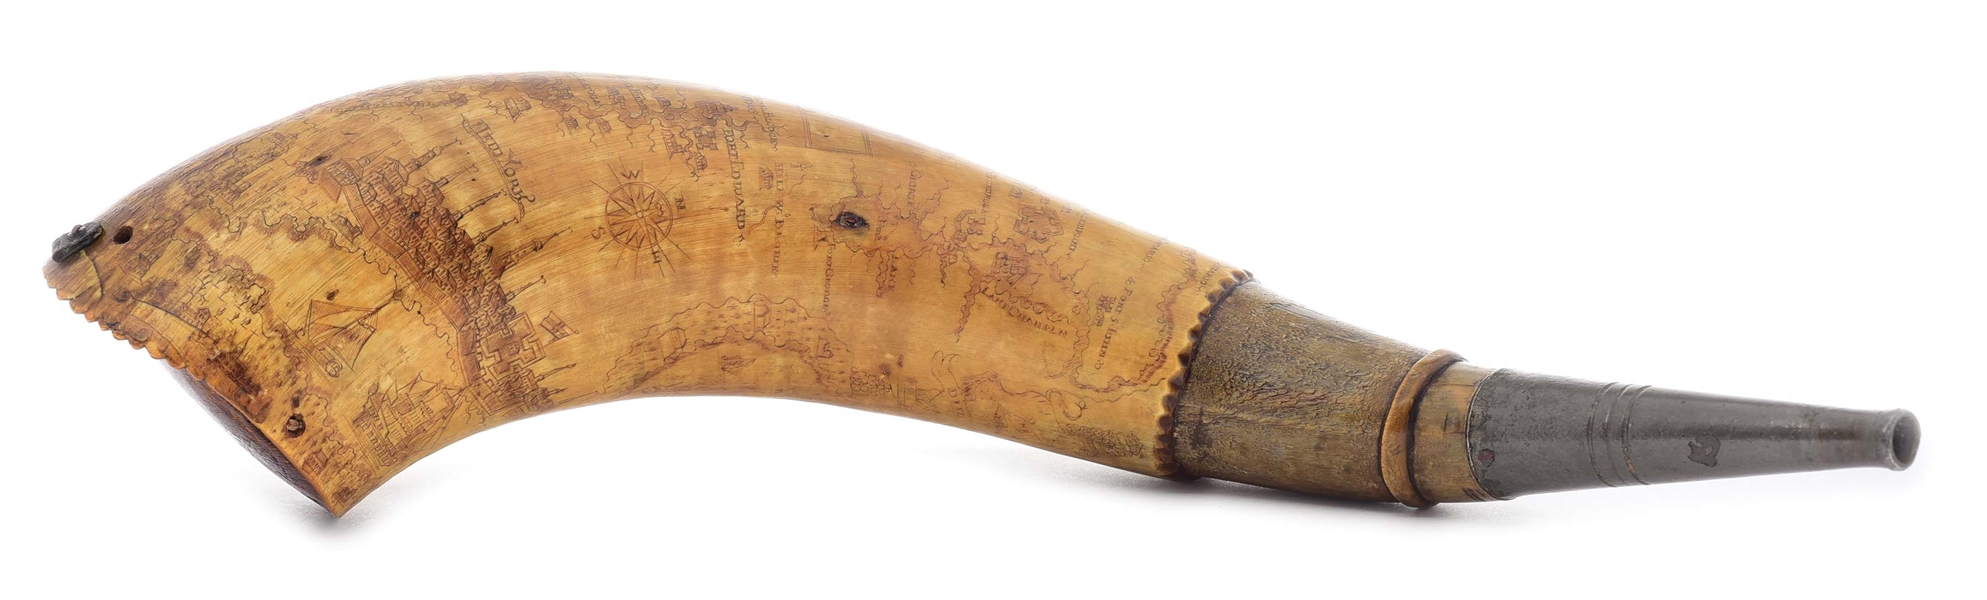 LARGE PROFESSIONALLY ENGRAVED FRENCH AND INDIAN WAR HAVANA MAP POWDER HORN.